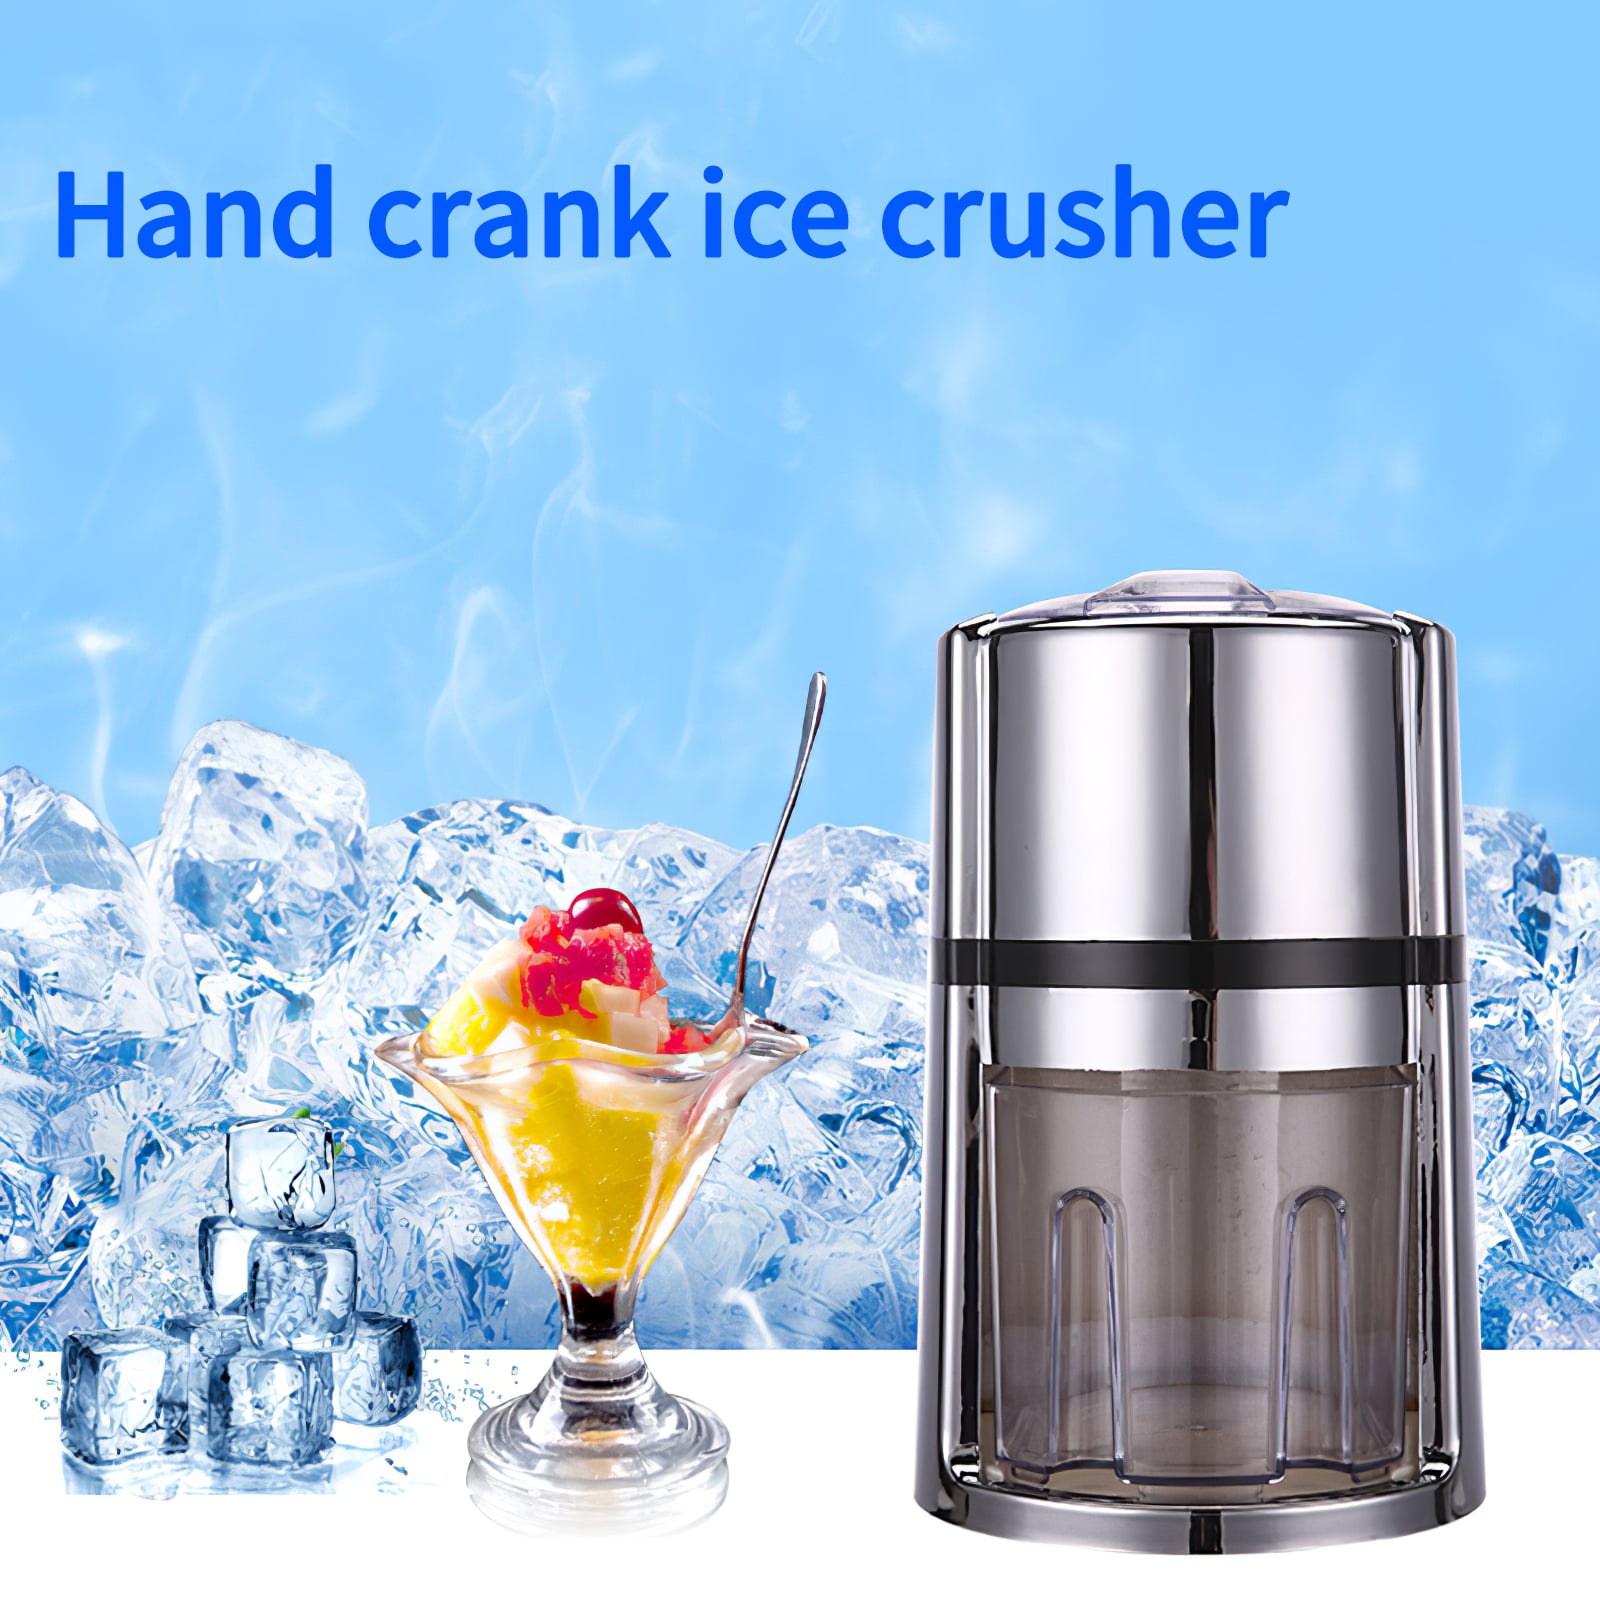 Shaved Ice Machine Snow Cone Machine Portable Ice Shaver for Home Bar Restaurant Party Cold Drinks Stainless Steel Blades for Fast Crushing Manual Ice Crusher Easy to Use 